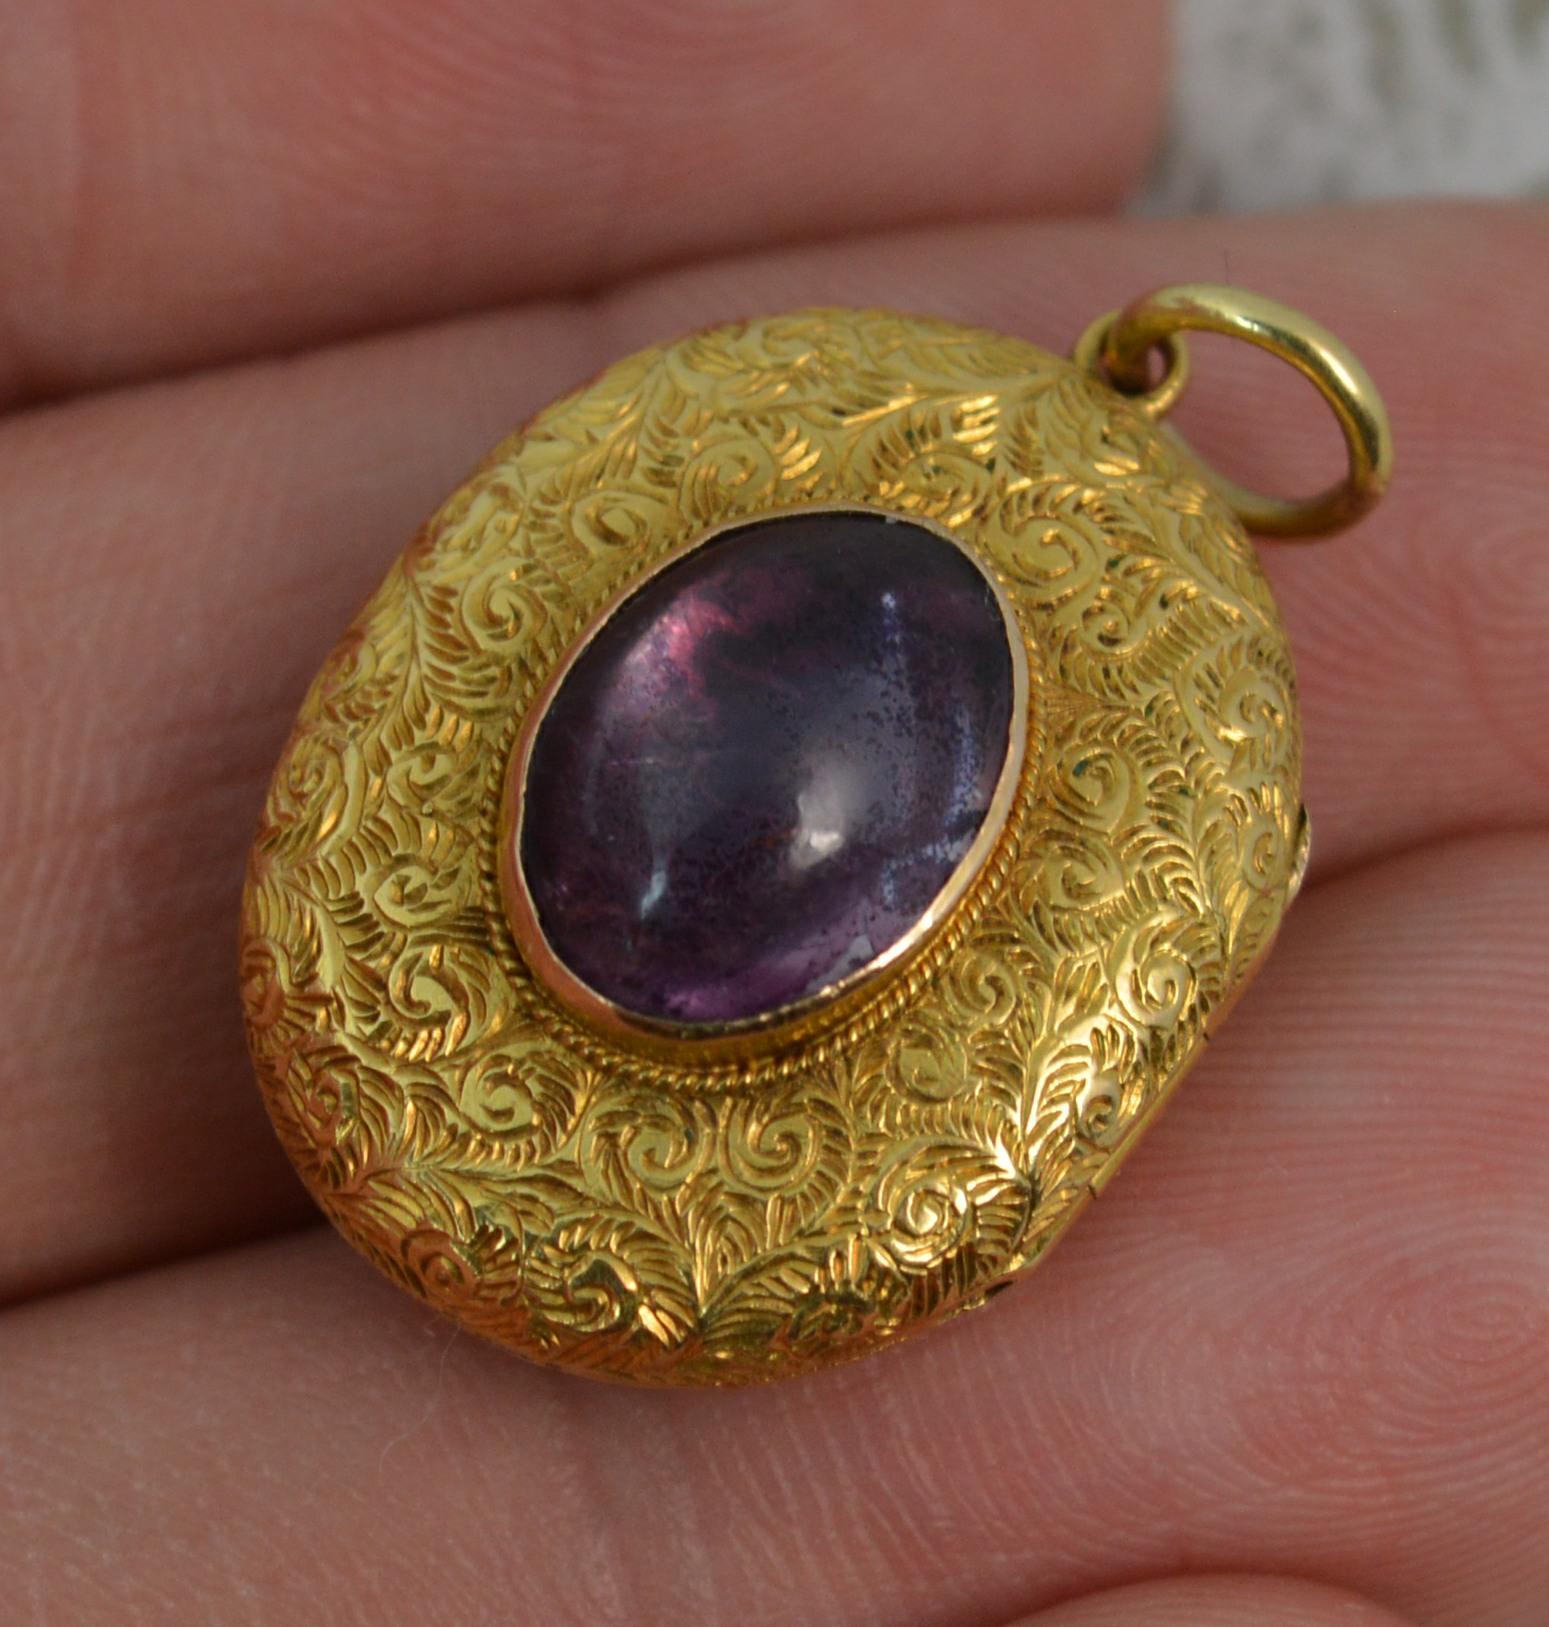 A true Victorian period pendant locket c1880.
Solid 15 carat yellow gold example.
Designed with a single oval cabochon amethyst on closed foiled pale pink back.
Very fine hand engraved pattern throughout.

CONDITION ; Excellent. Very crisp design.